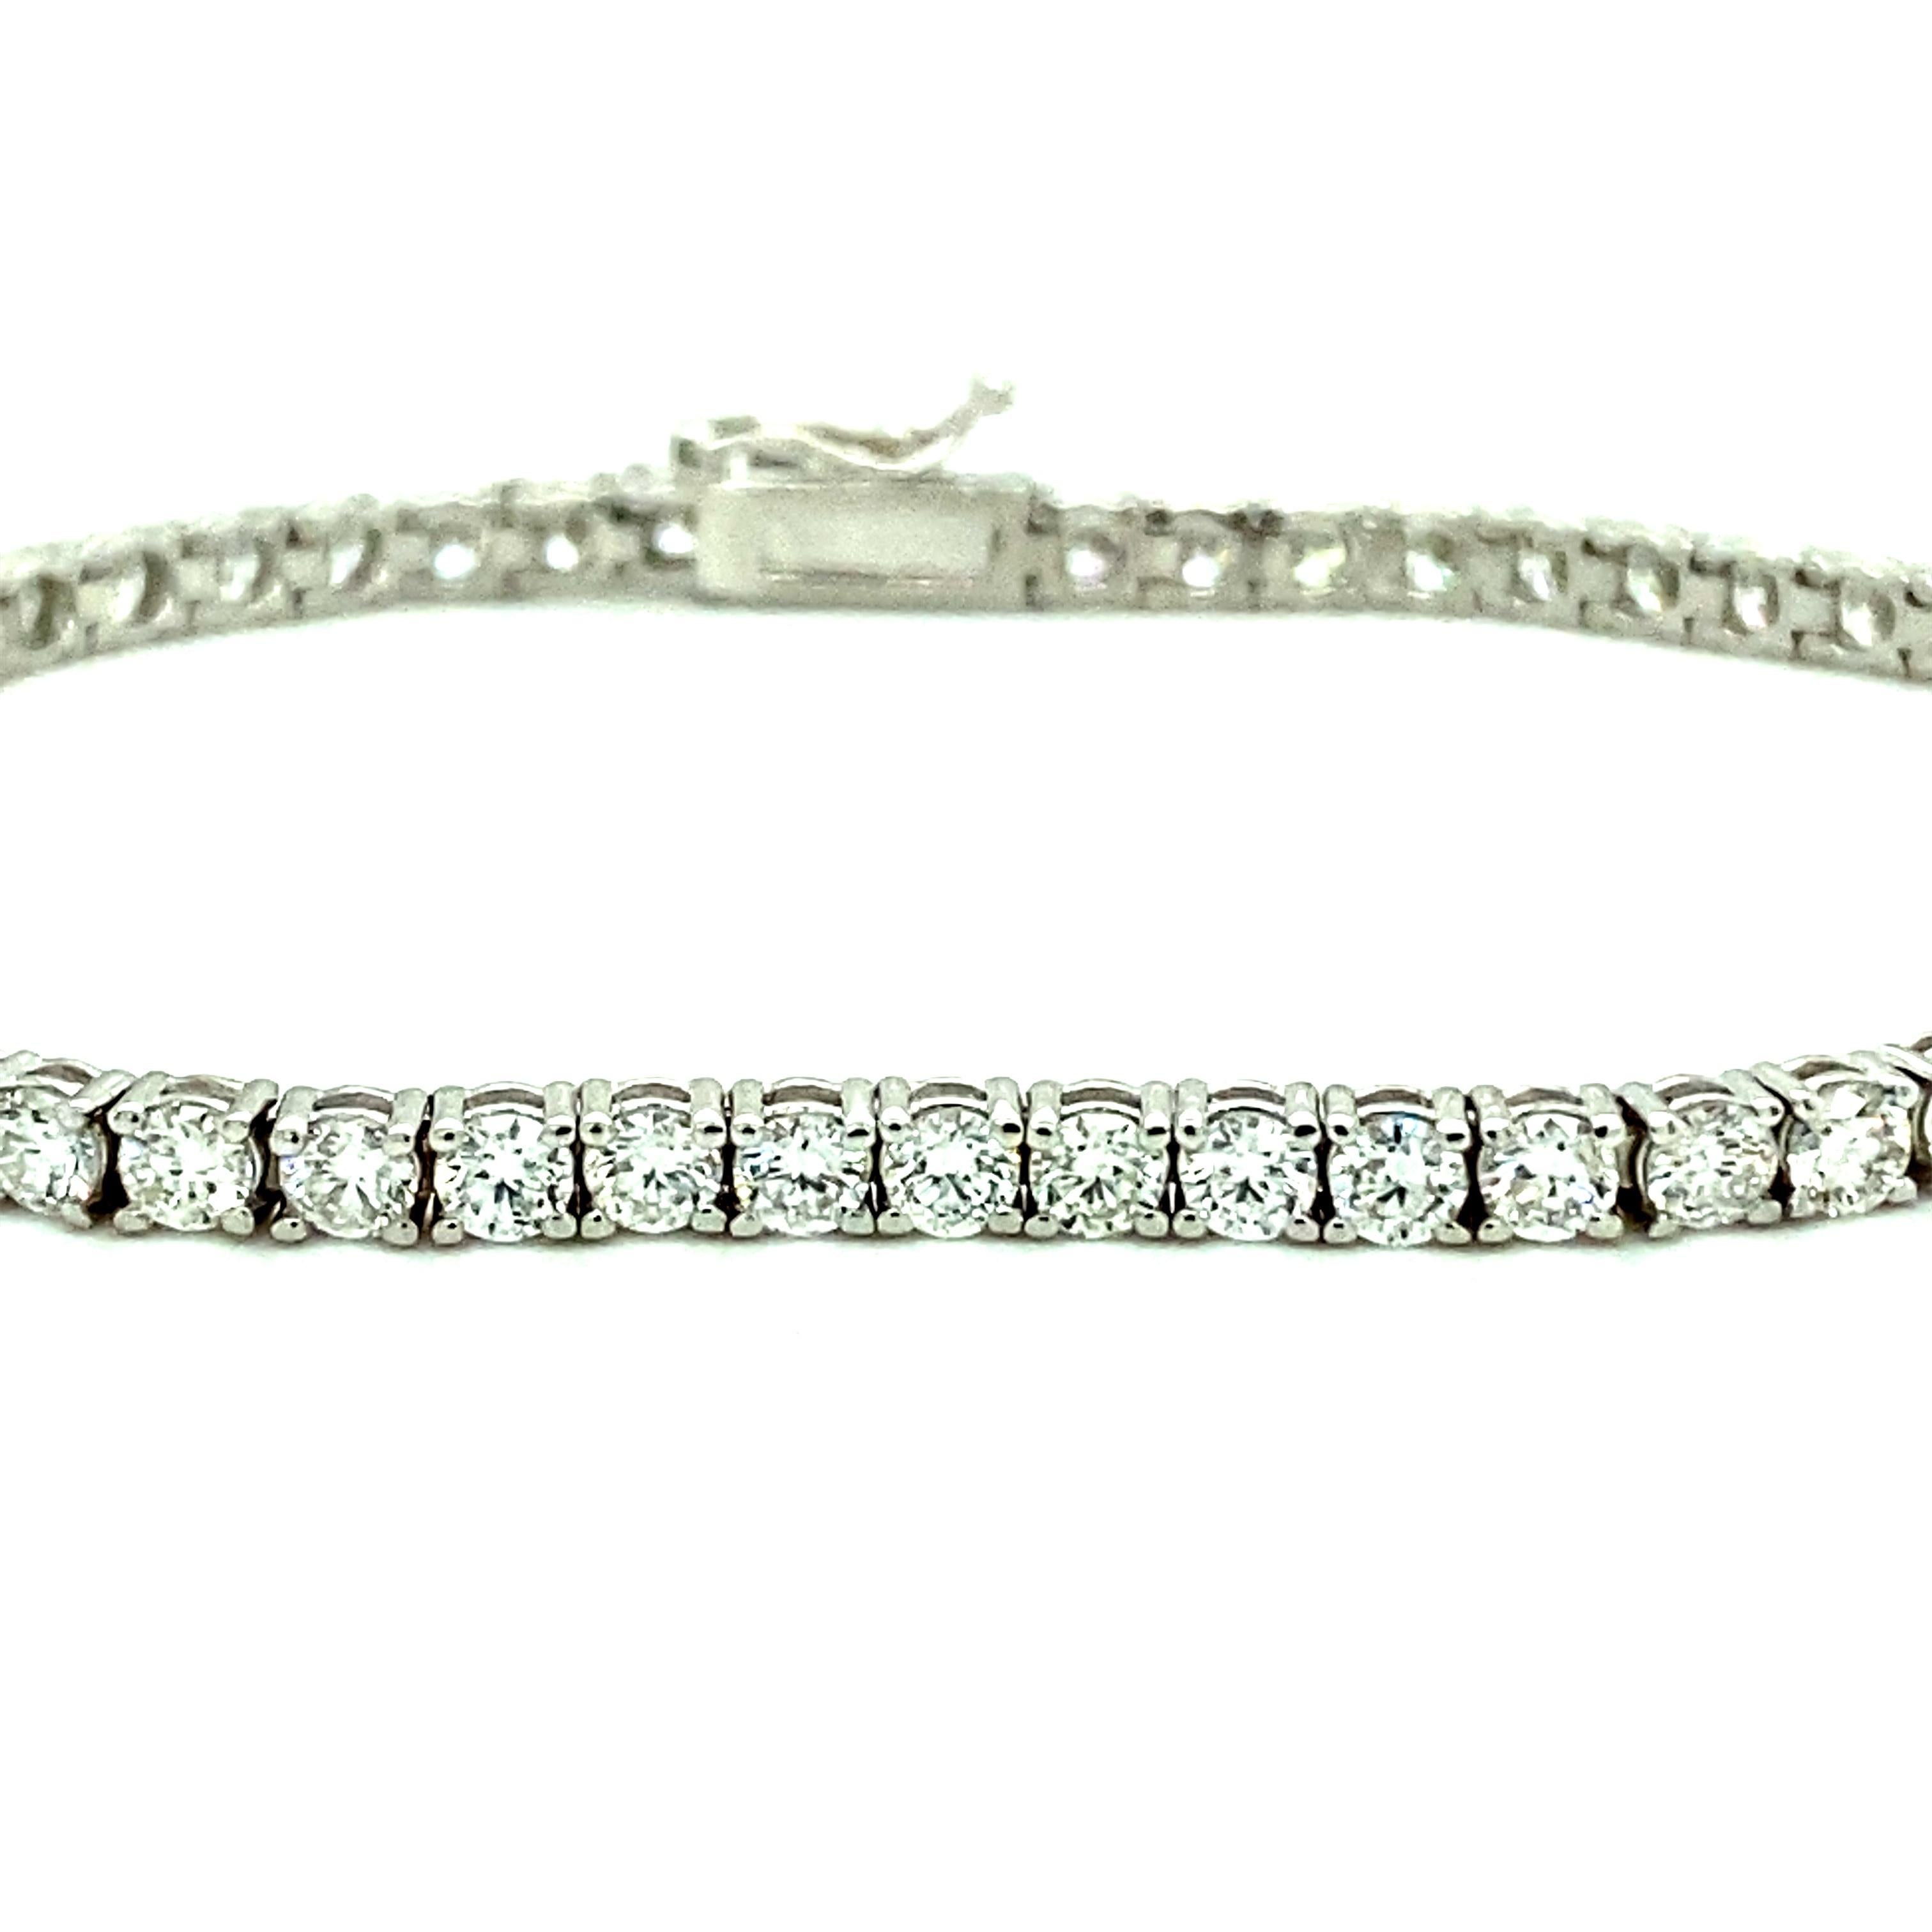 Offered here is a gorgeous diamond tennis bracelet in 14kt White Gold. 
Diamond: 55 natural round brilliant cut diamonds with an estimated total weight of 5.50 ct. 
Weight: 8.10 gr
Length: 7 1/2” (3 mm wide)